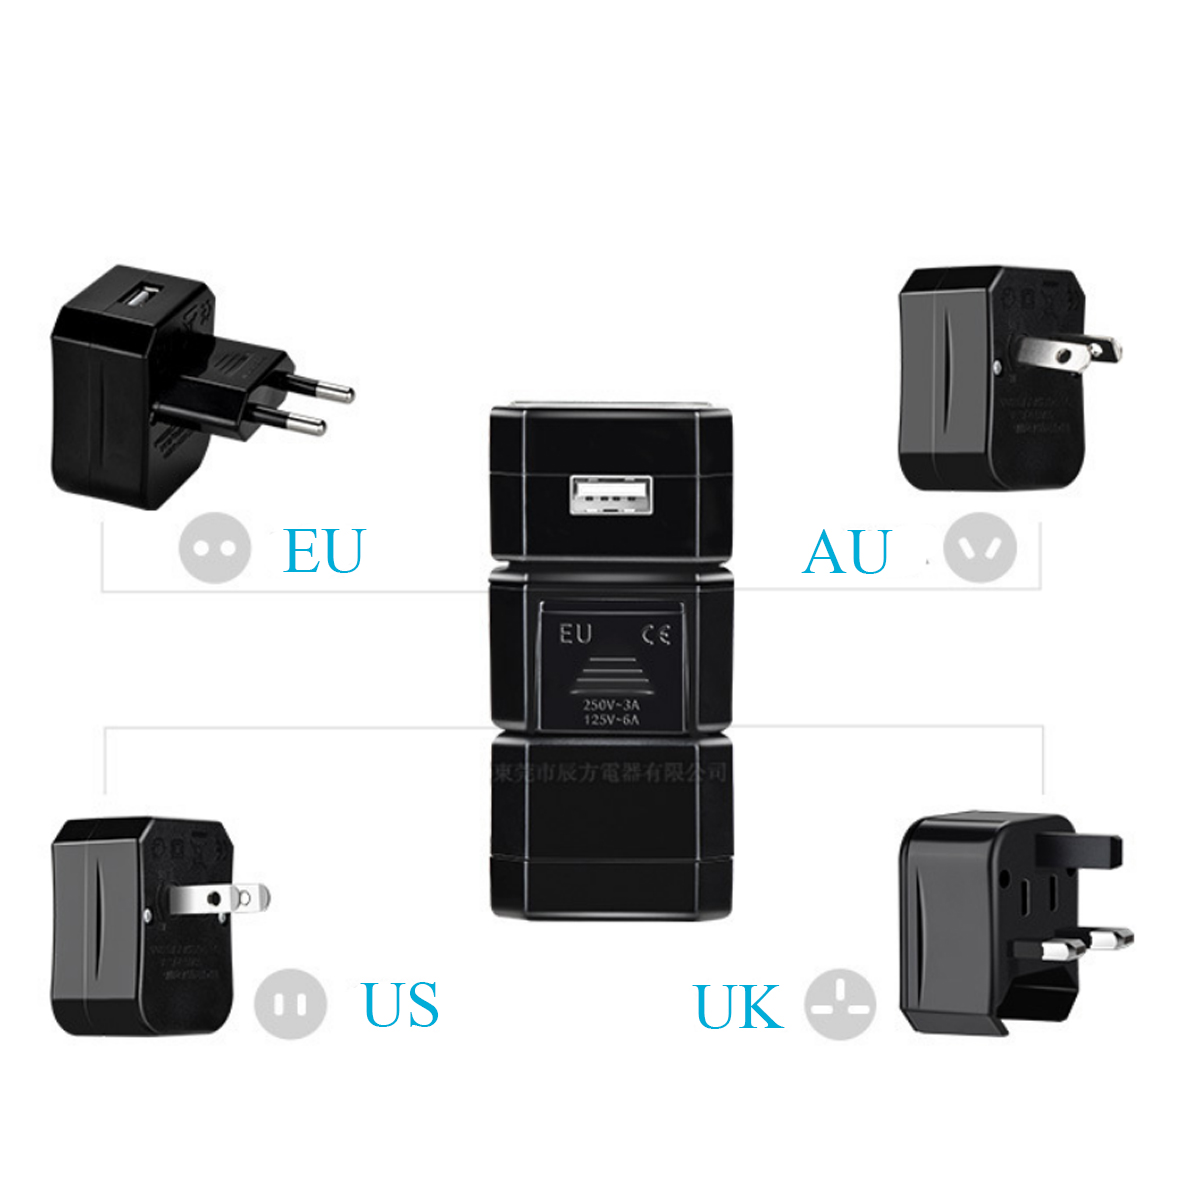 Travel-Adapter-Universal-Power-Adapter-with-2-USB-Ports-Wall-Charger-AC-Power-Plug-1304296-2